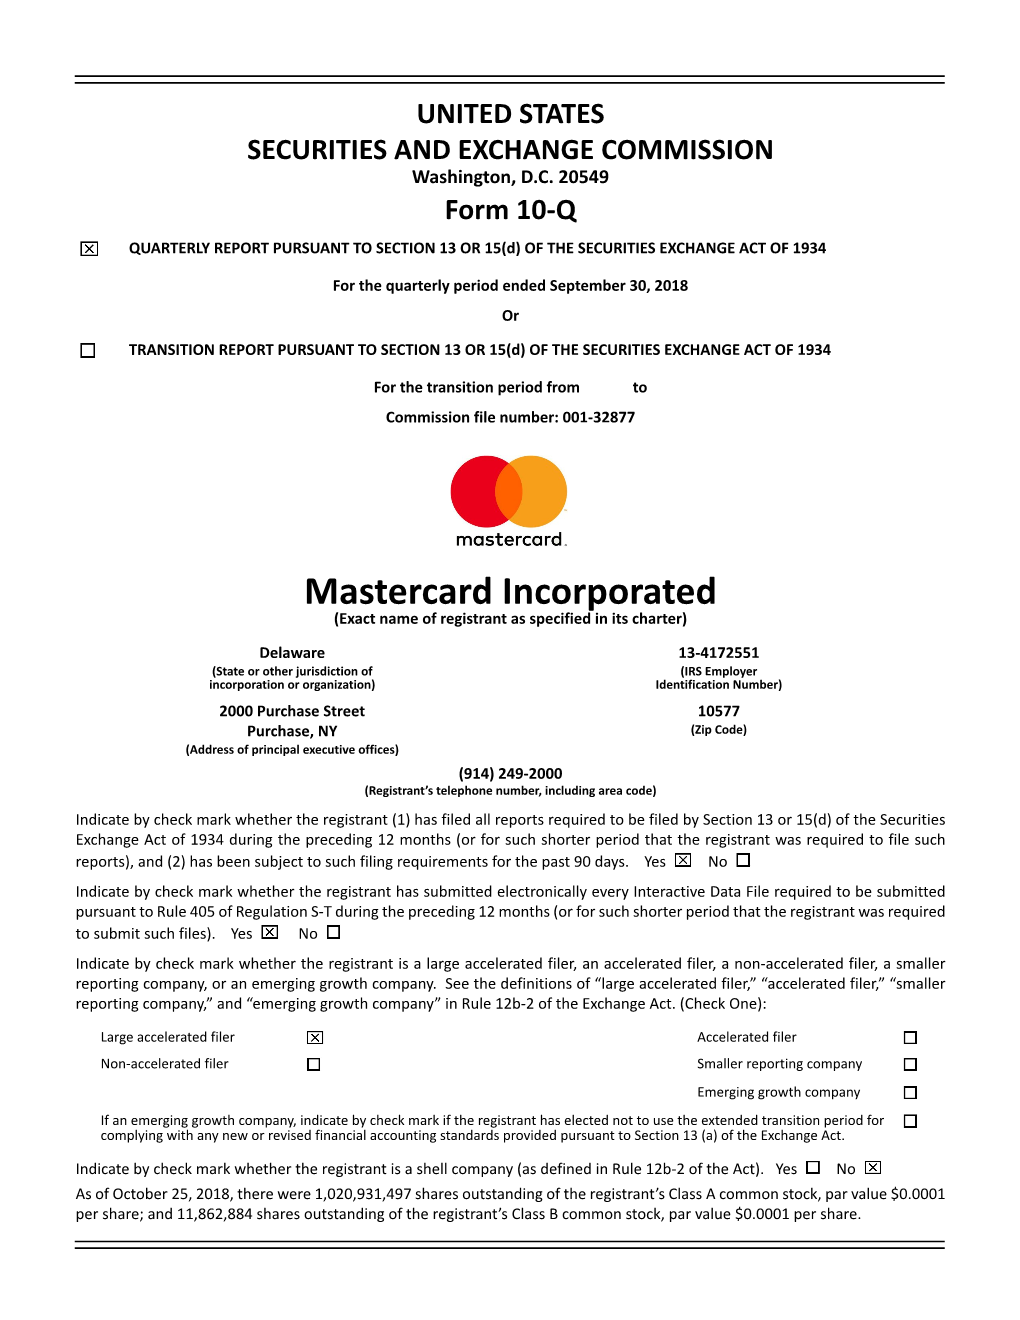 Mastercard Incorporated (Exact Name of Registrant As Specified in Its Charter)